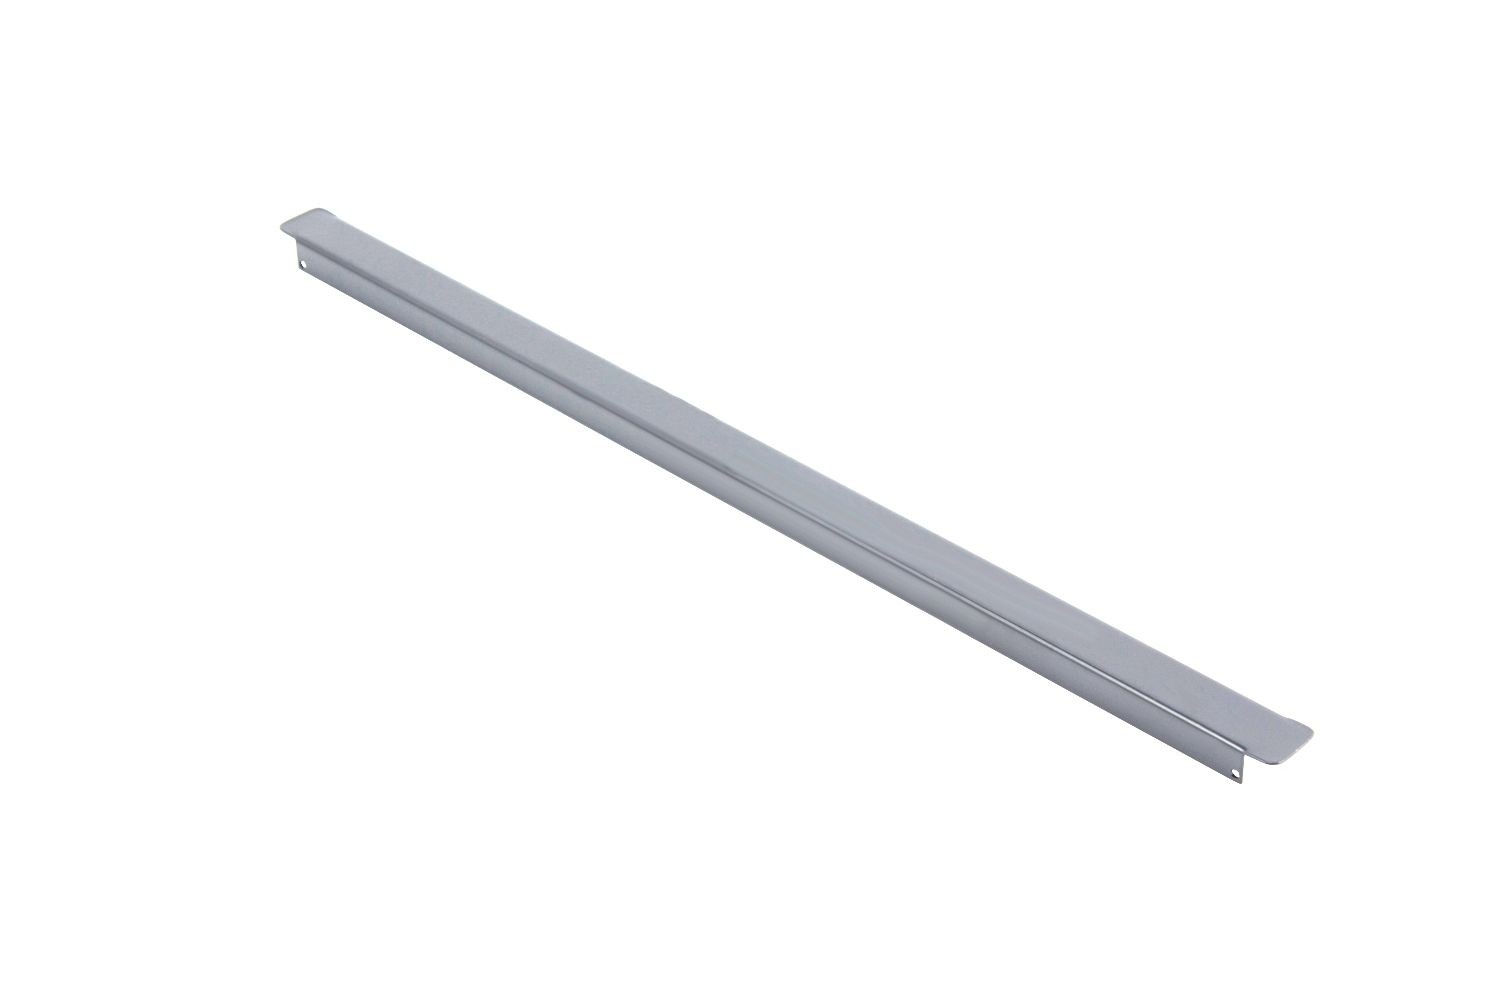 Bon Chef 52055P Spacer Bar for EZ Fit Tiles, Pewter Glo 20 3/4" x 1"